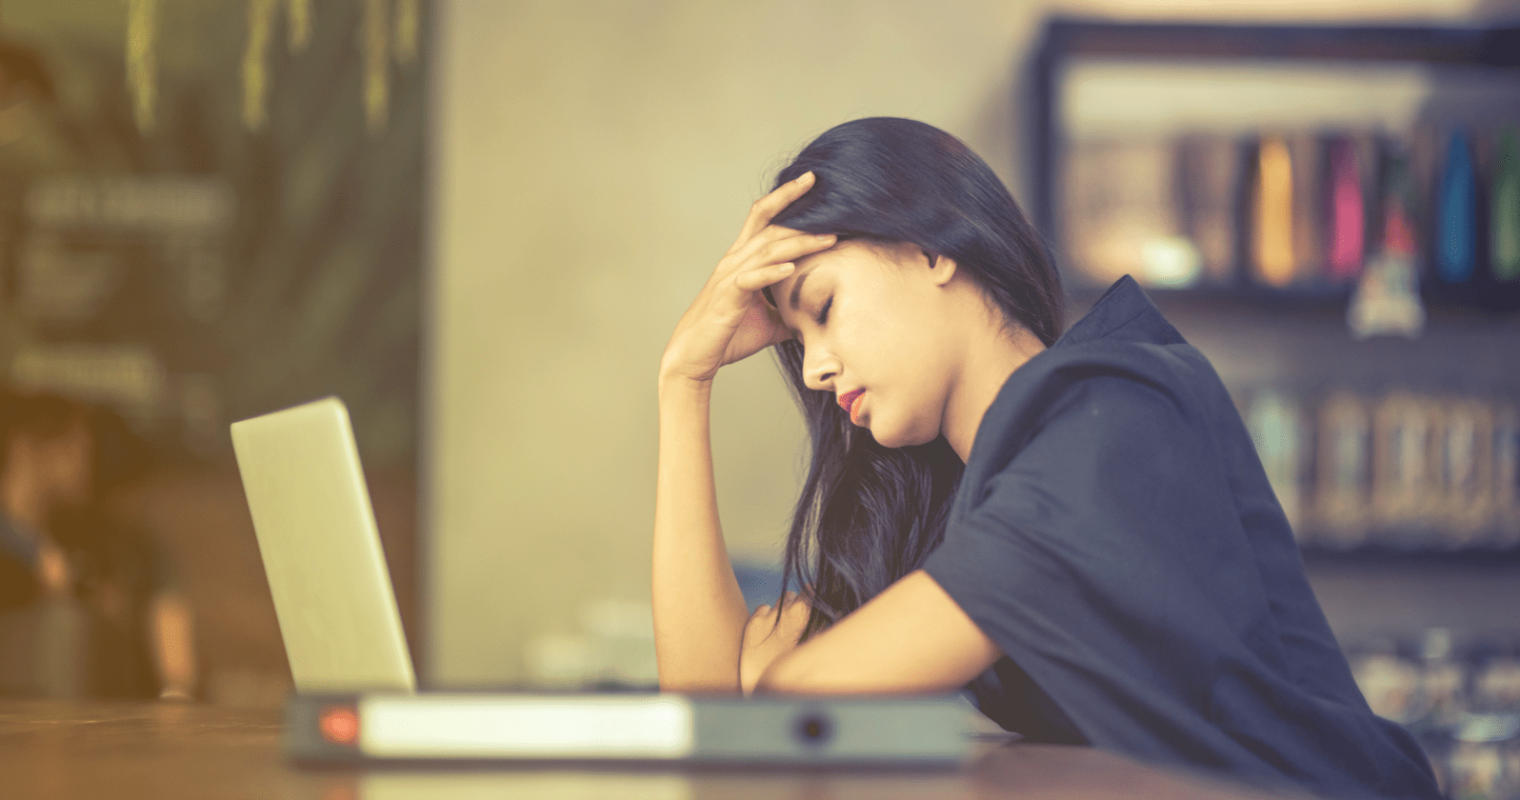 7 Biggest Causes of Stress for Digital Marketers